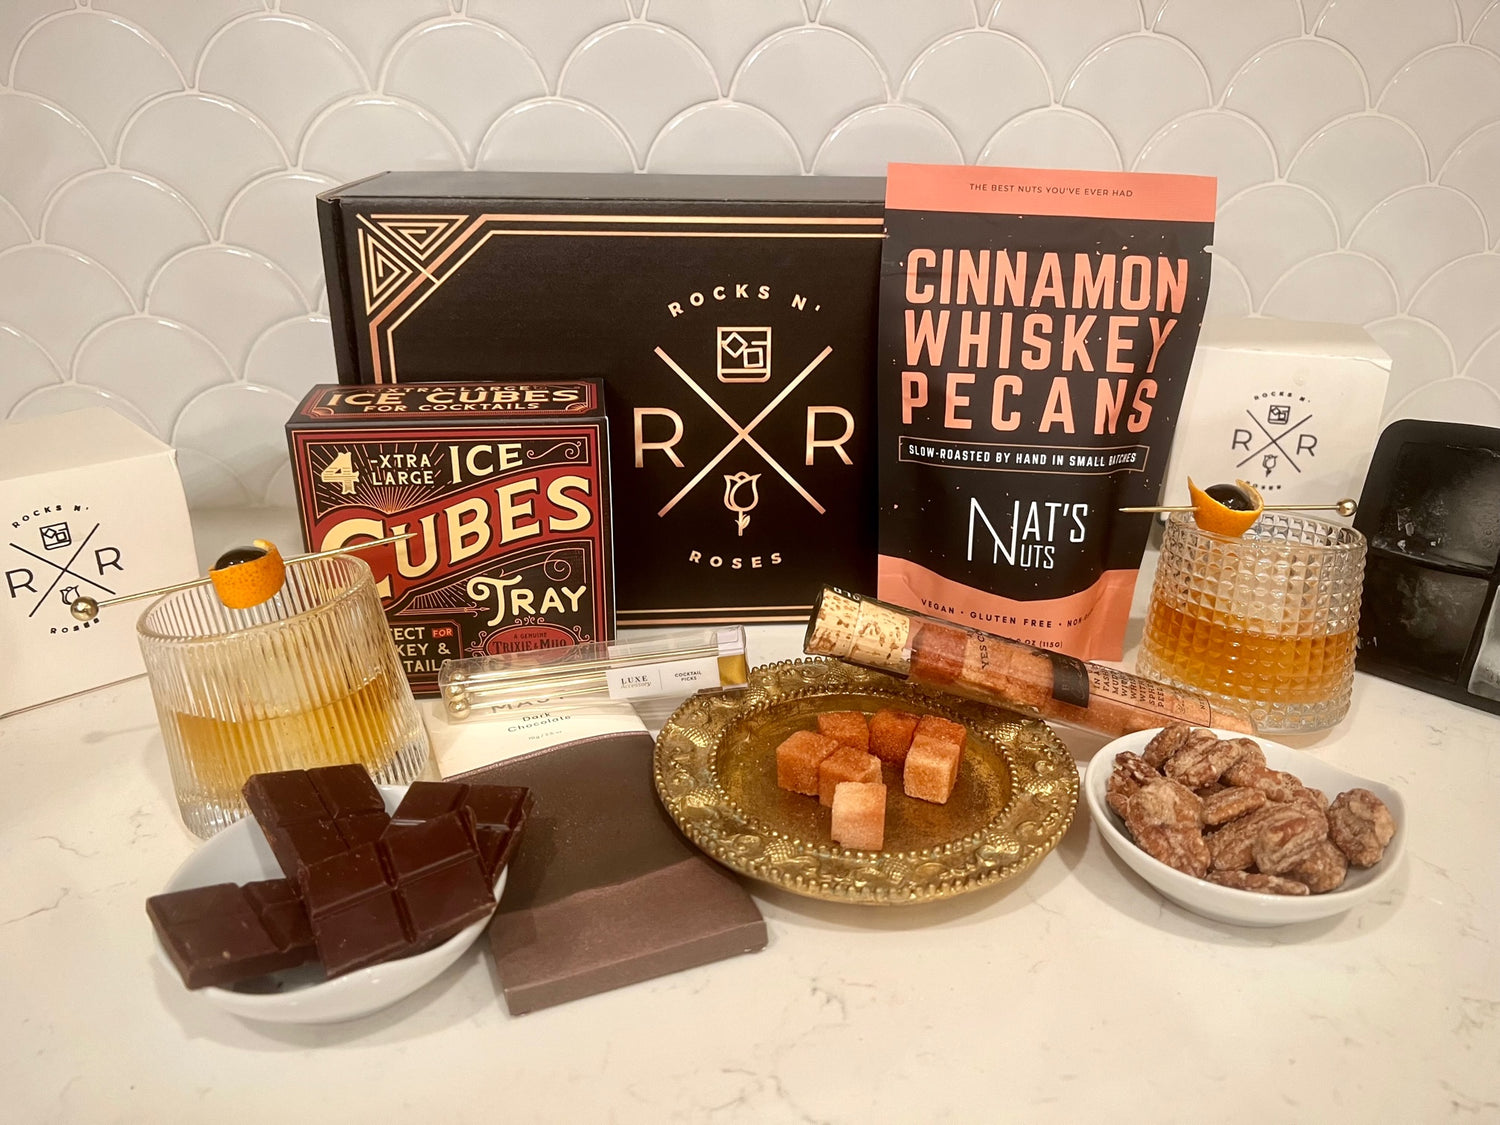 Rocks N' Roses Bourbon Box revealed. This kit features - 2 RNR SPINNING WHISKEY/BOURBON GLASSES  🥃  - MAST BROTHER'S DARK CHOCOLATE BAR 🍫  - NAT'S NUTS CINNAMON WHISKEY PECANS  - TRIXIE & MILO'S EXTRA LARGE ICE CUBES 🧊  - YES COCKTAIL'S OLD FASHIONED SUGAR CUBES  - LUXE COCKTAIL PICKS 🍊🍒